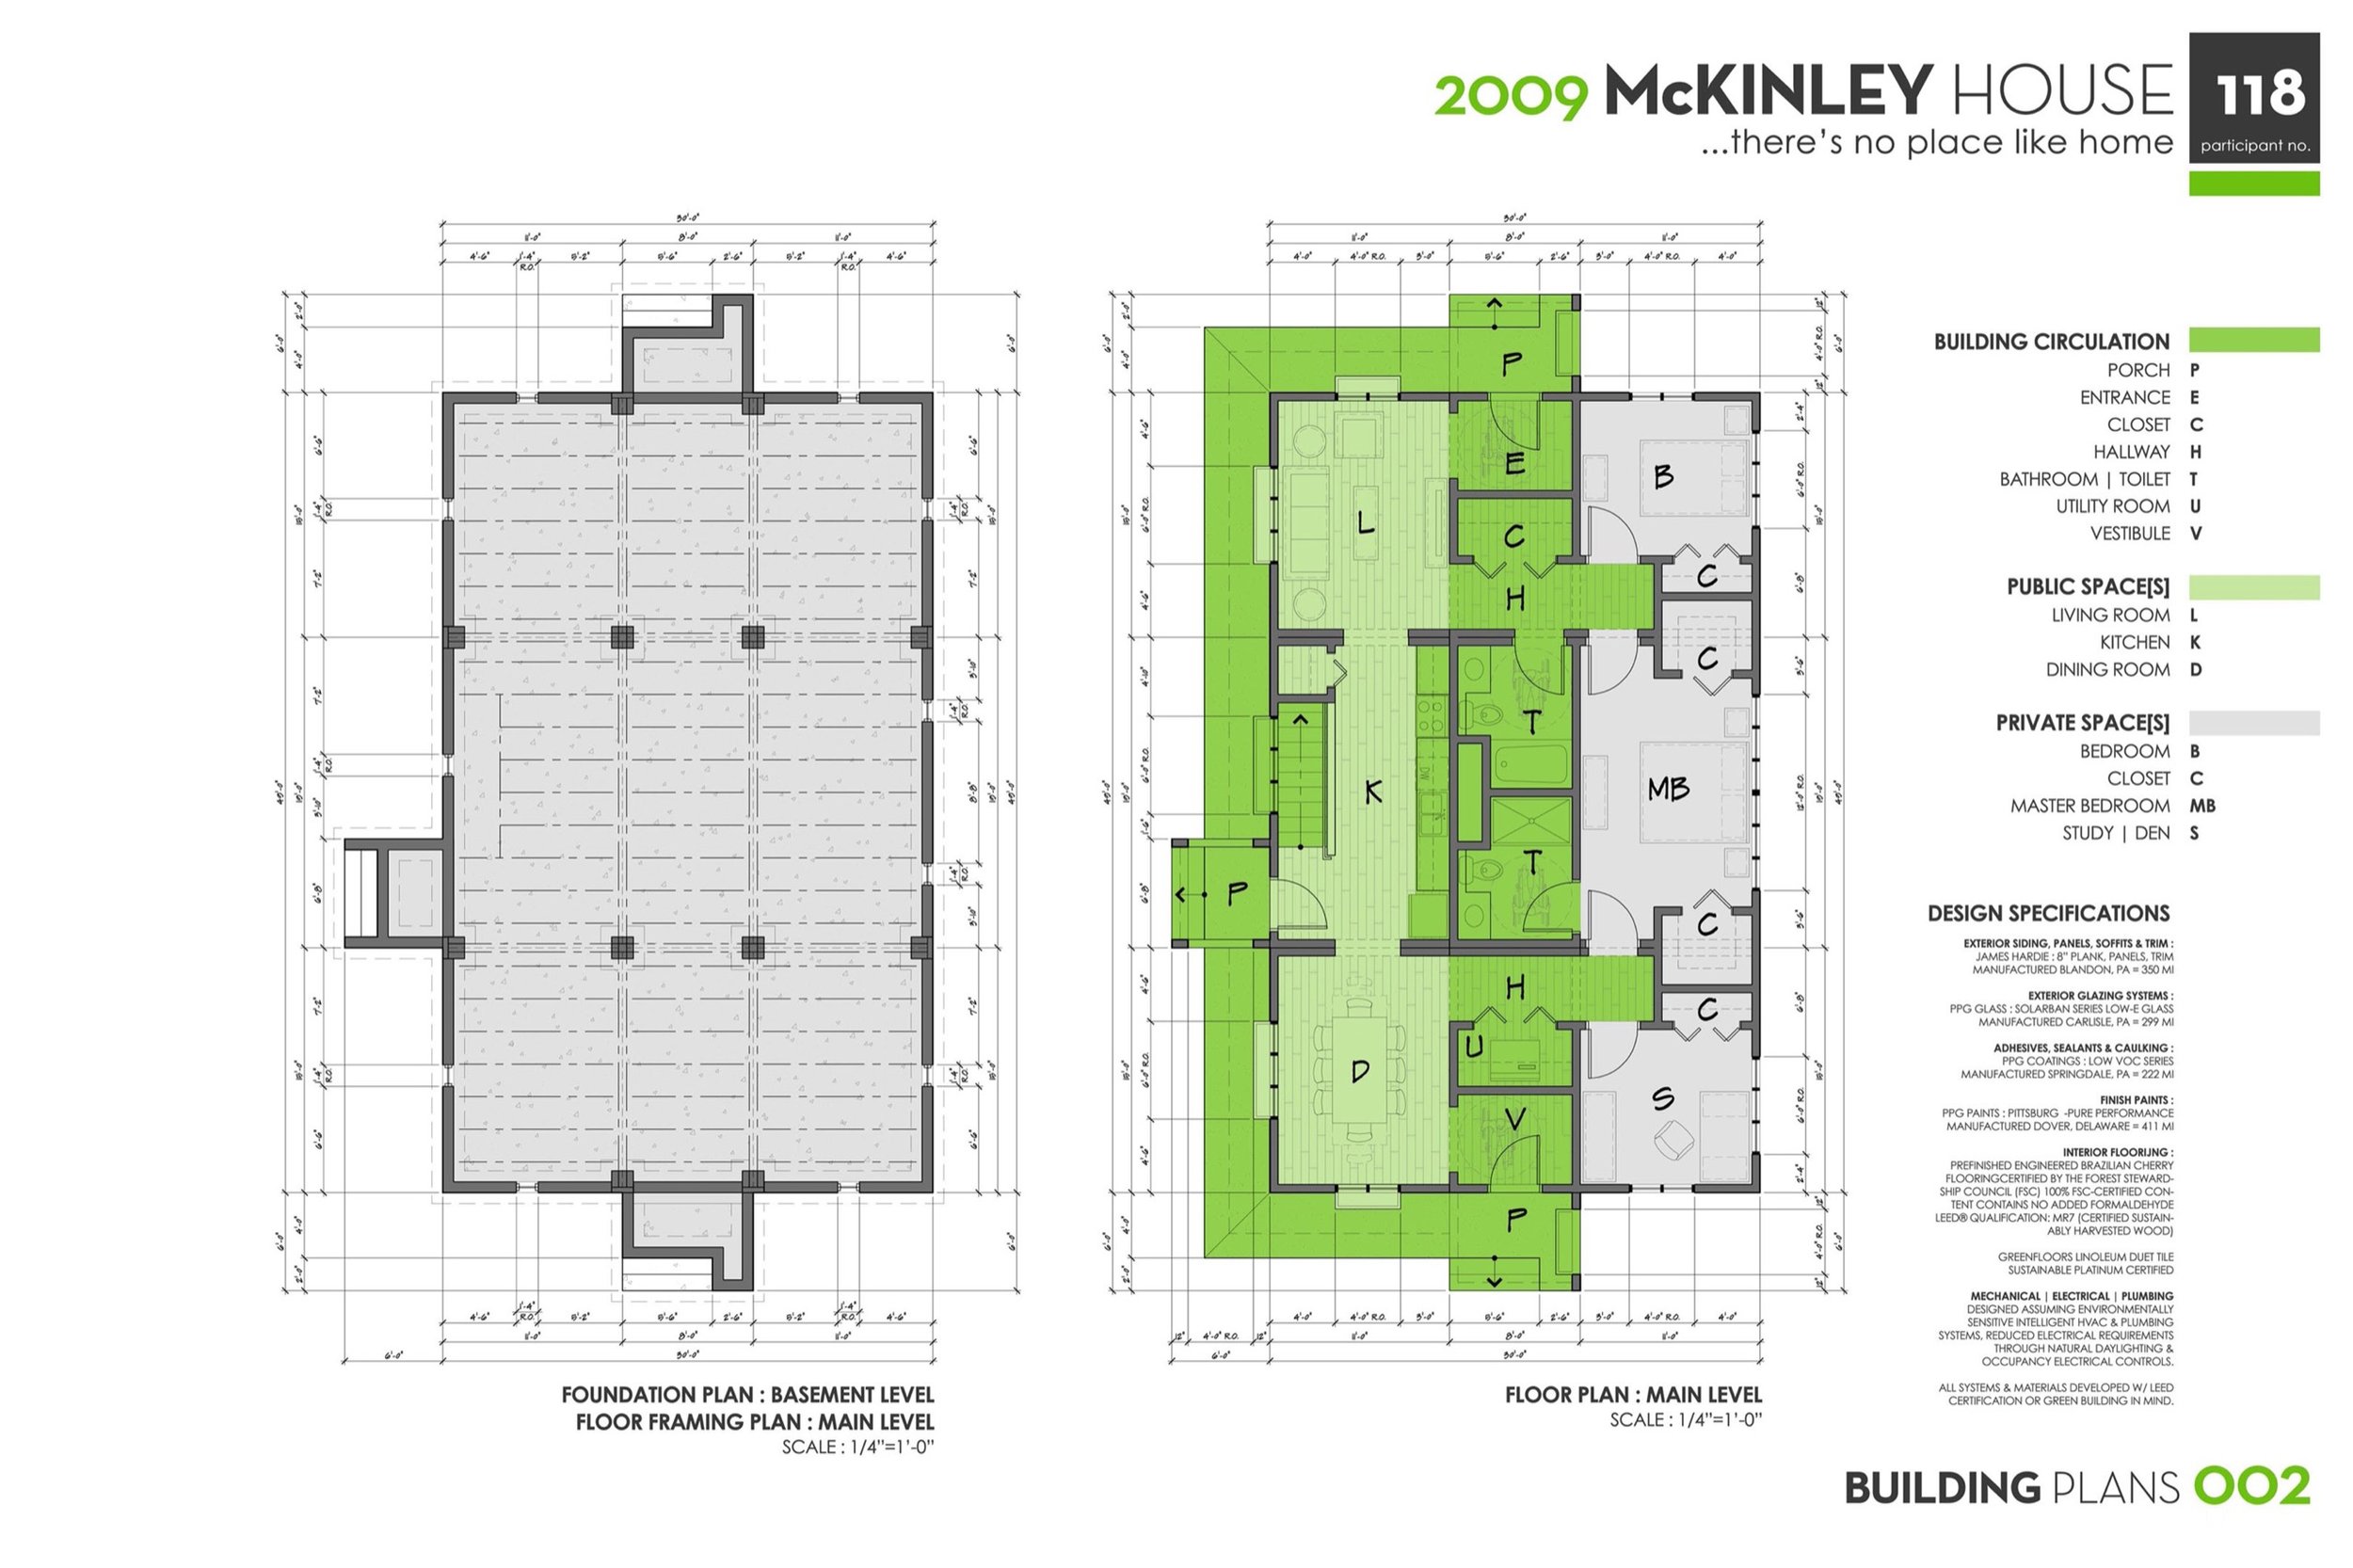 RD-rel8-Architects-Tampa-McKinley-02.jpeg